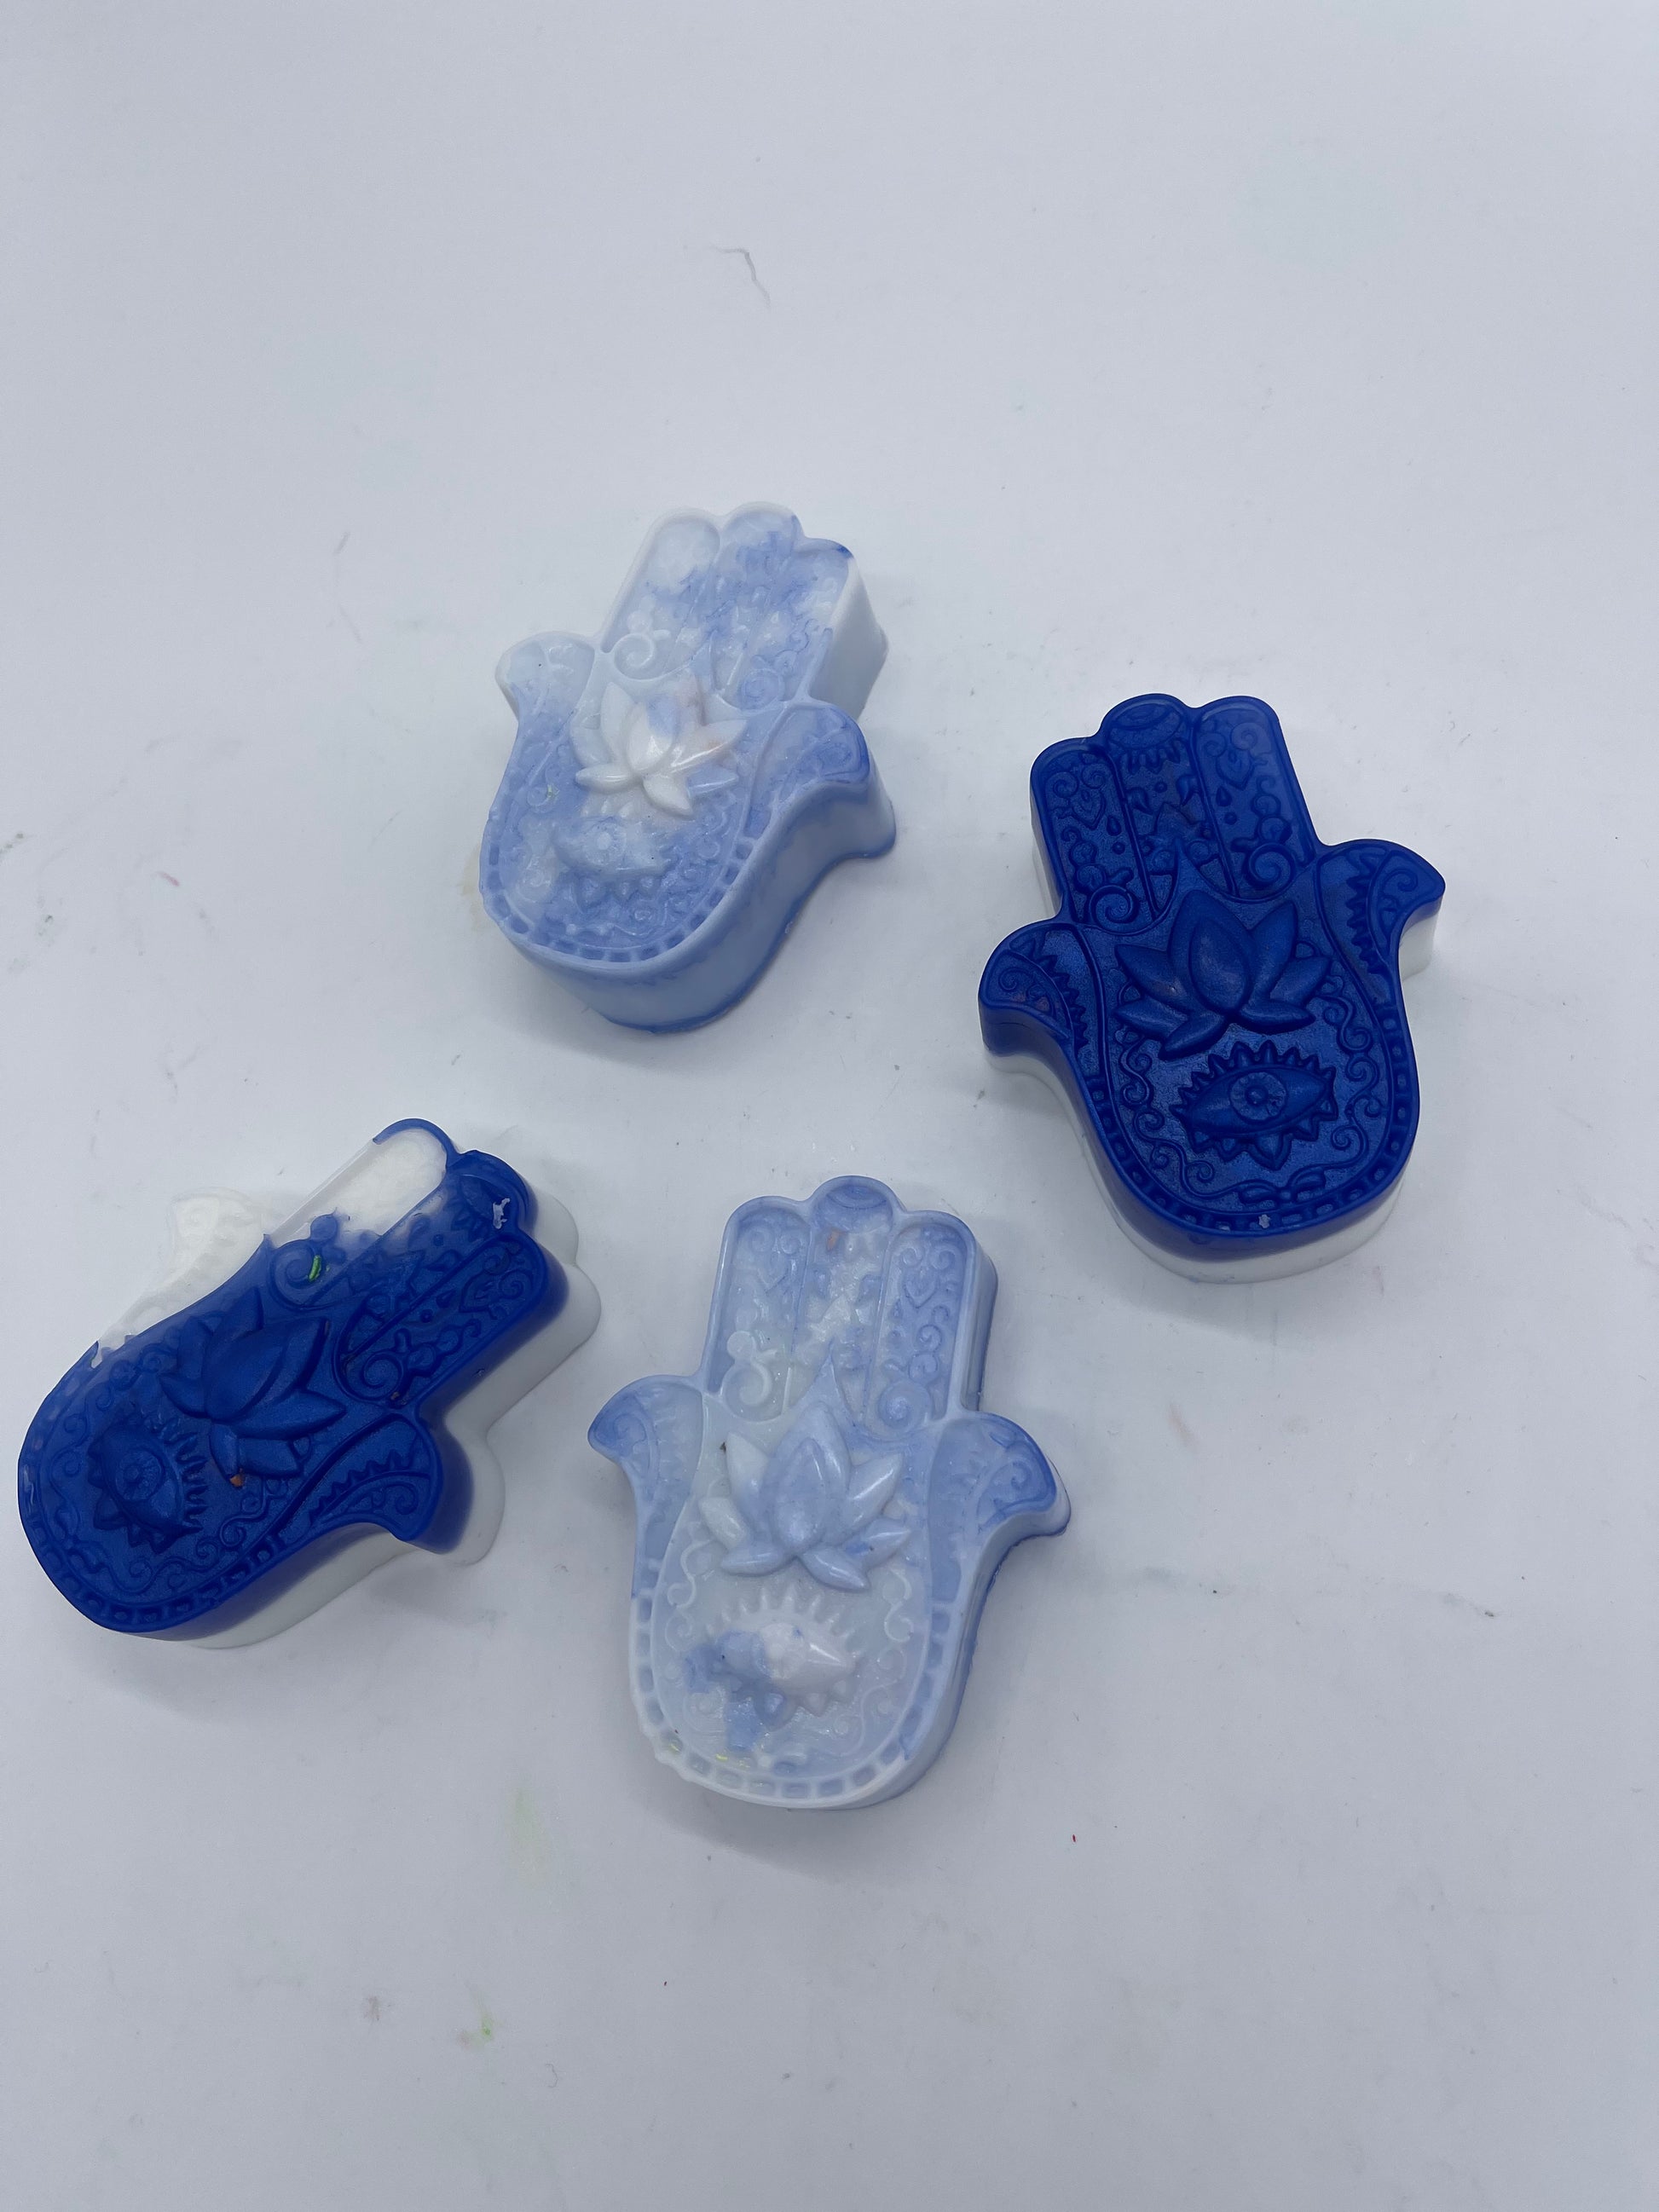 soaps shapes in form of hamsa. Colors vary between bright swirls or blue and white combo swirls